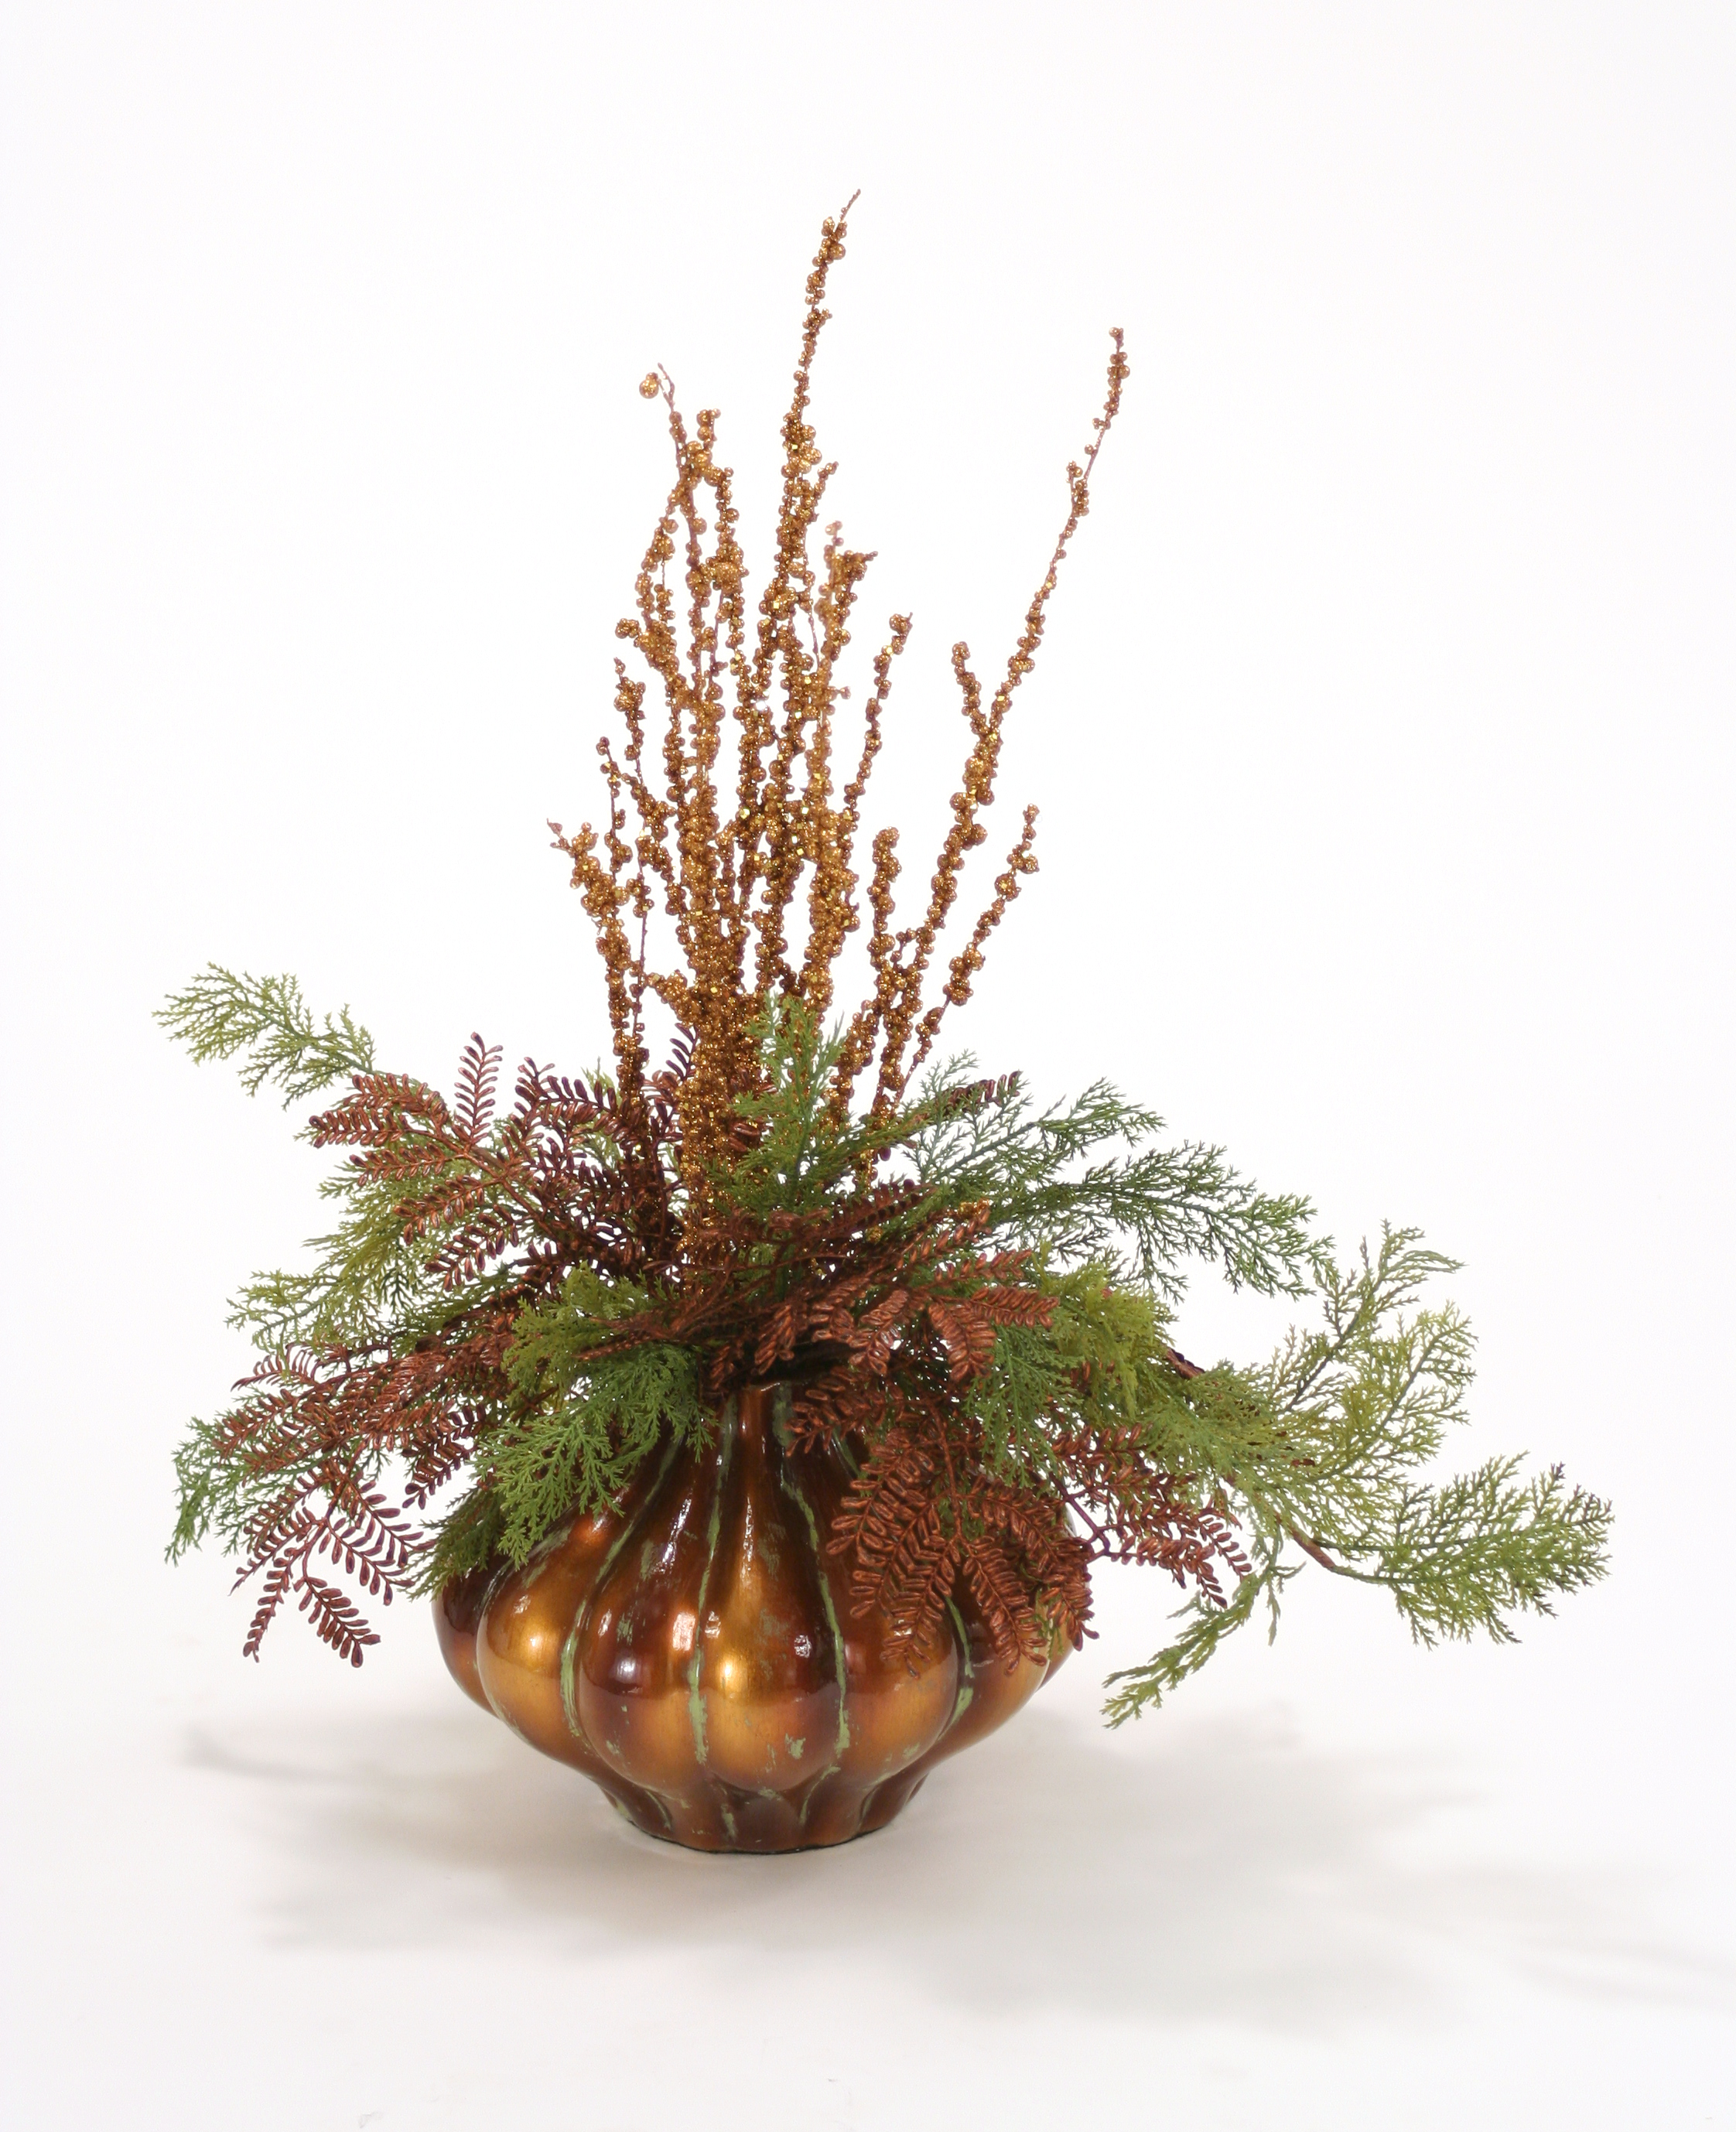 Merry Christmas - 24' Sequined Twigs, Cedar in Ribbed Gold Porcelain Vase